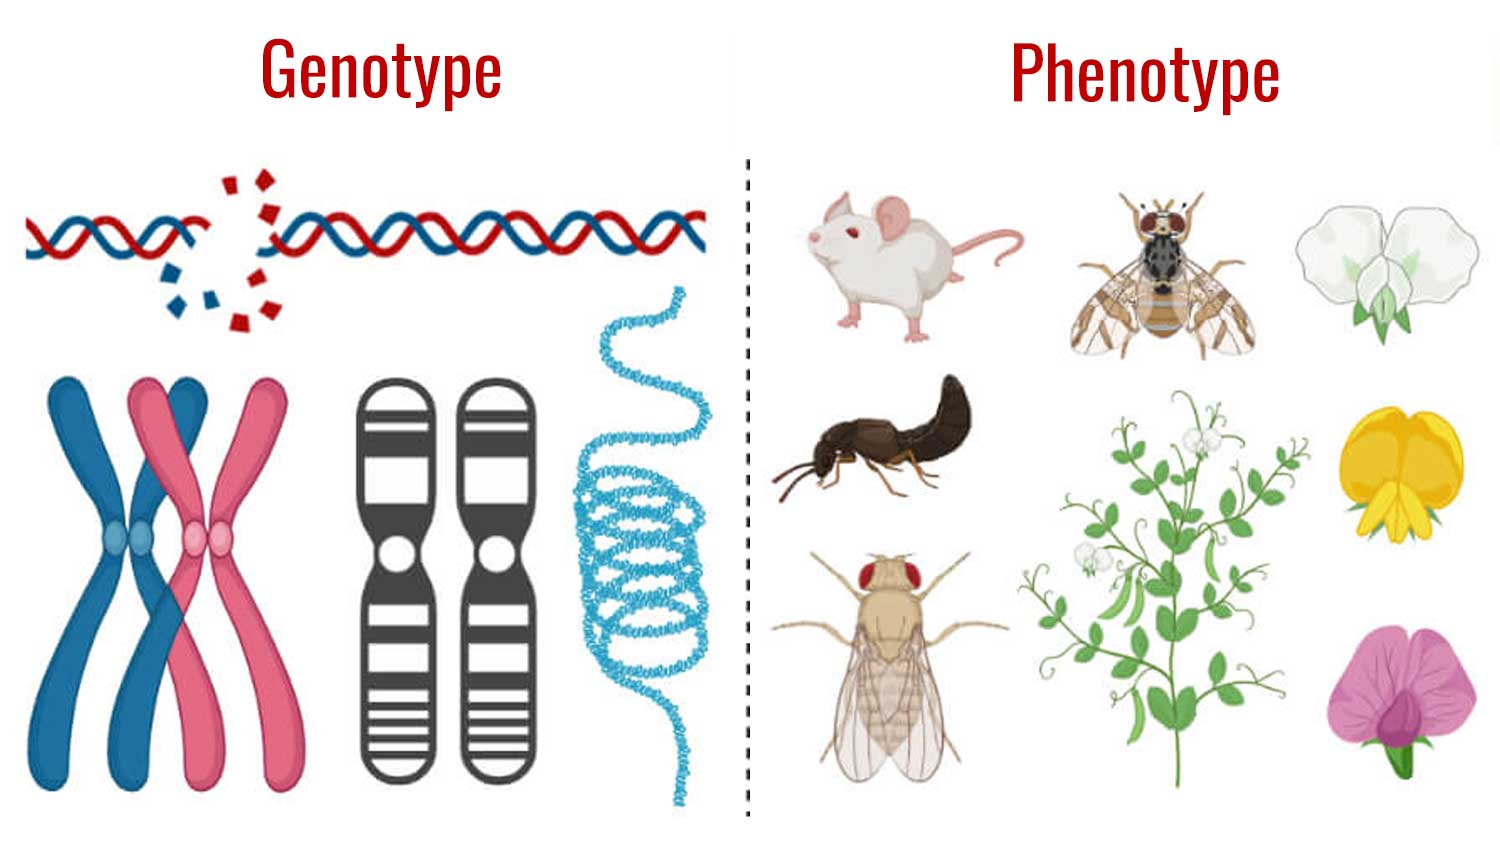 illustration showing differences between genotype and phenotype